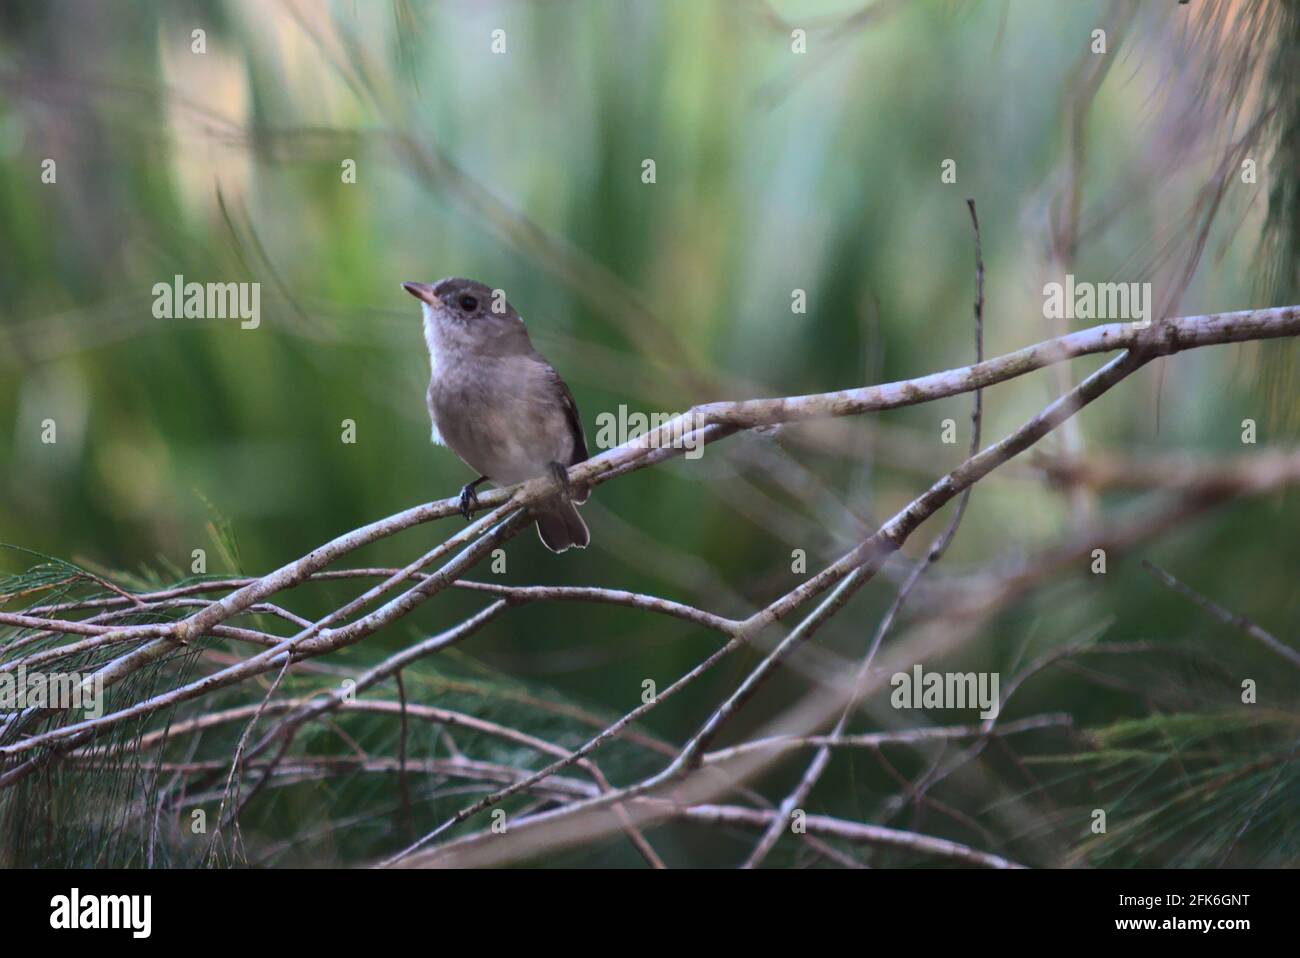 Small bird on a branch Stock Photo